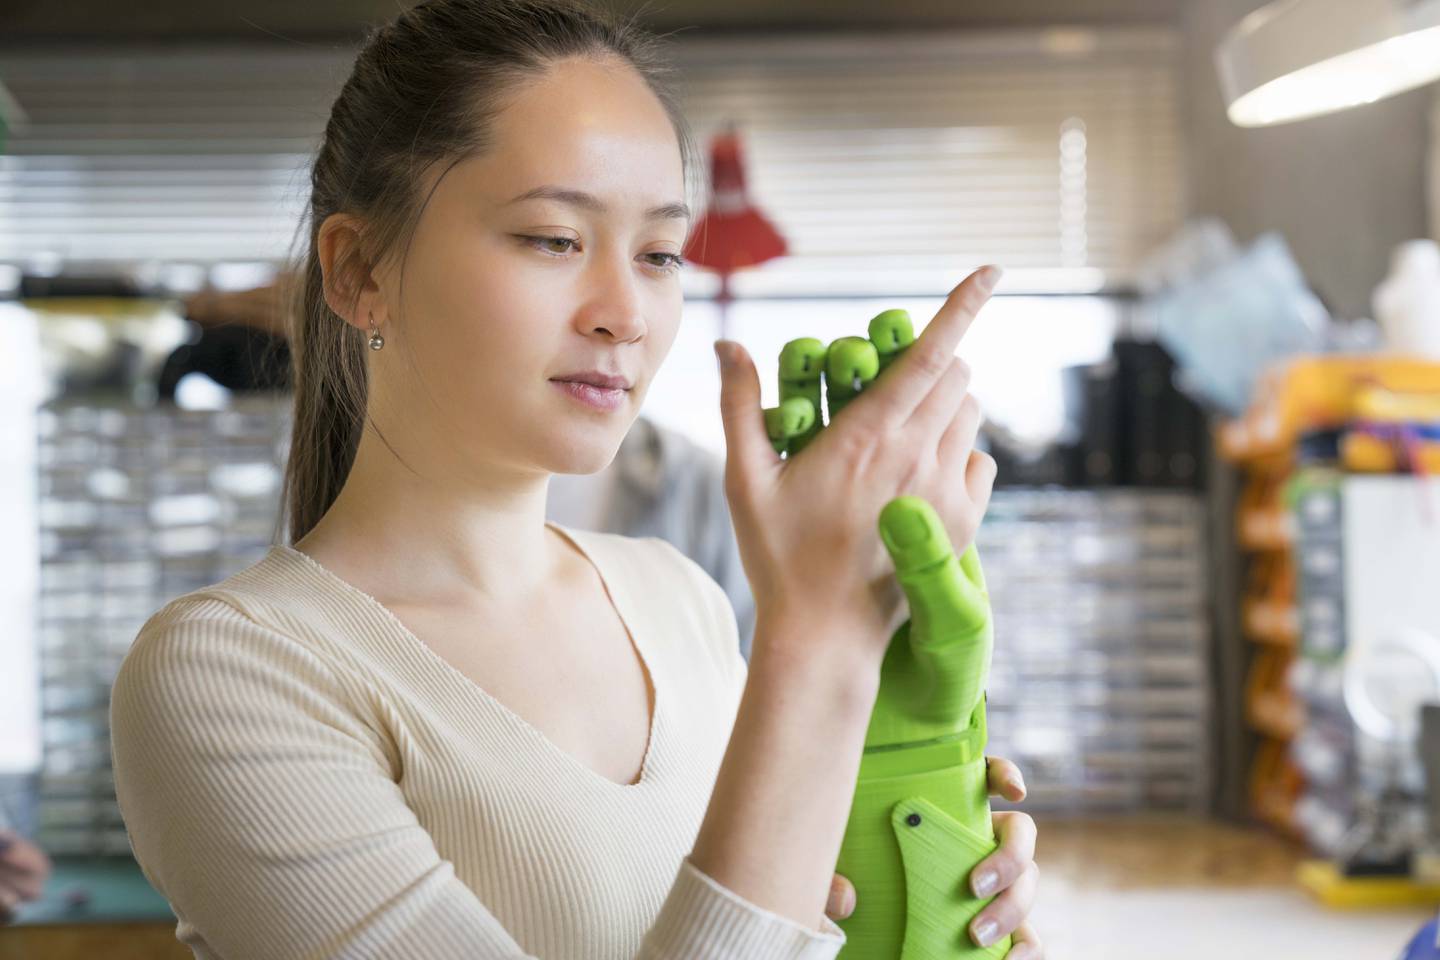 3d printed polymer limbs are becoming more widely used in hospital care. Photo: Getty Images